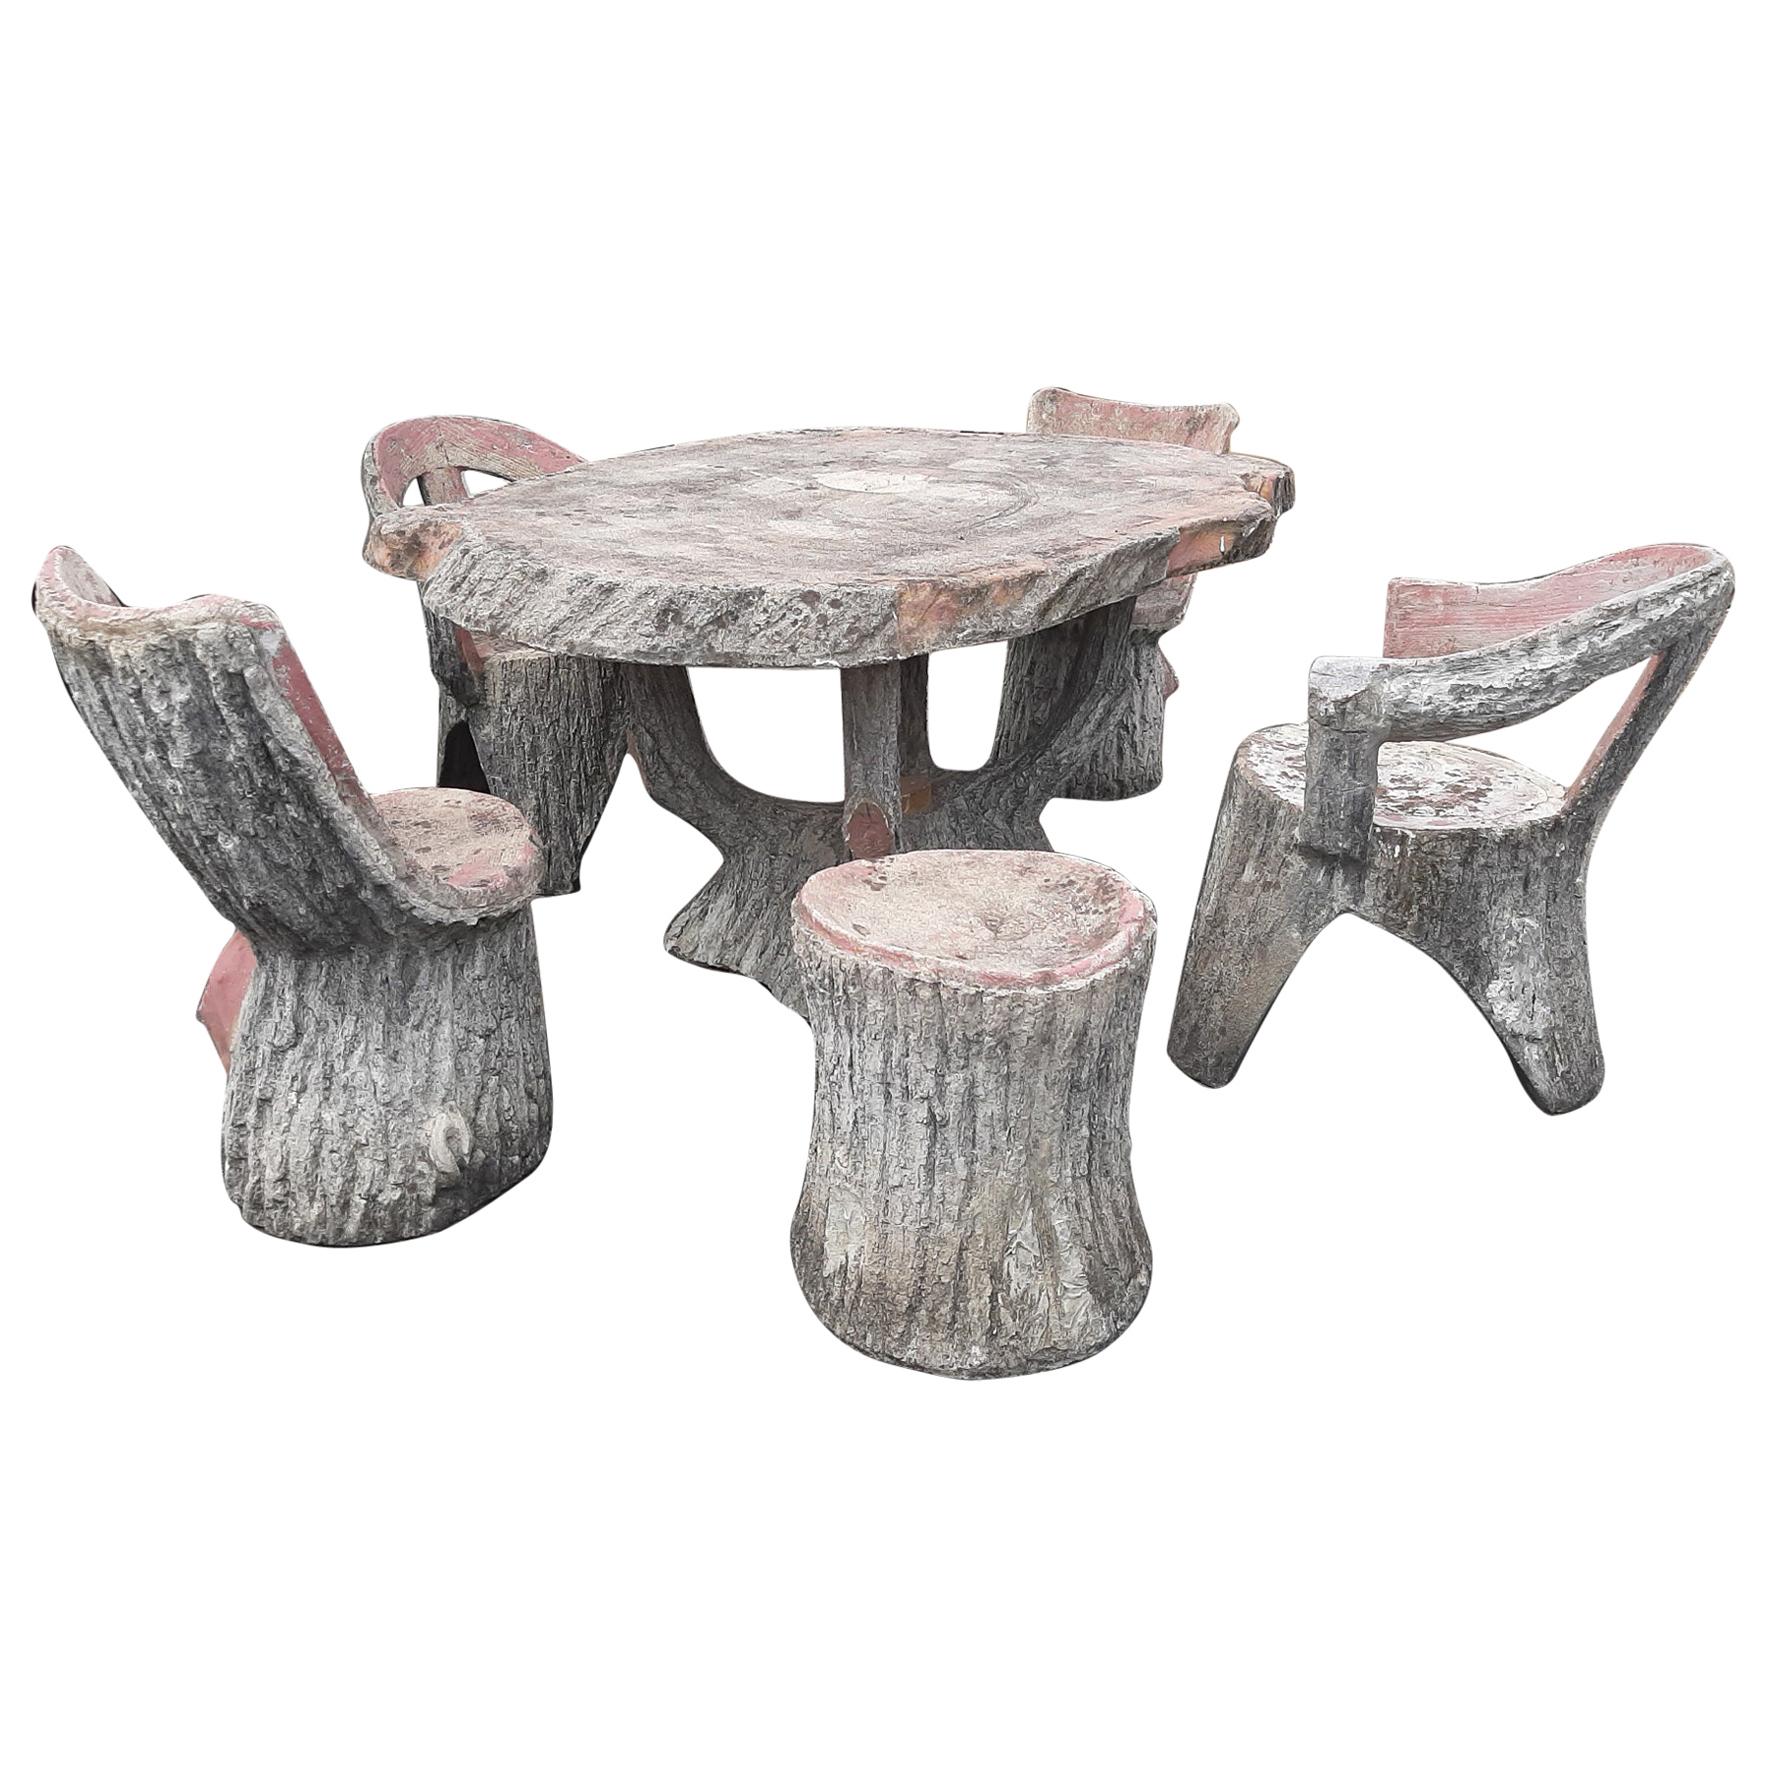 Midcentury Faux Bois Stone Garden Table and Chairs at 1stDibs